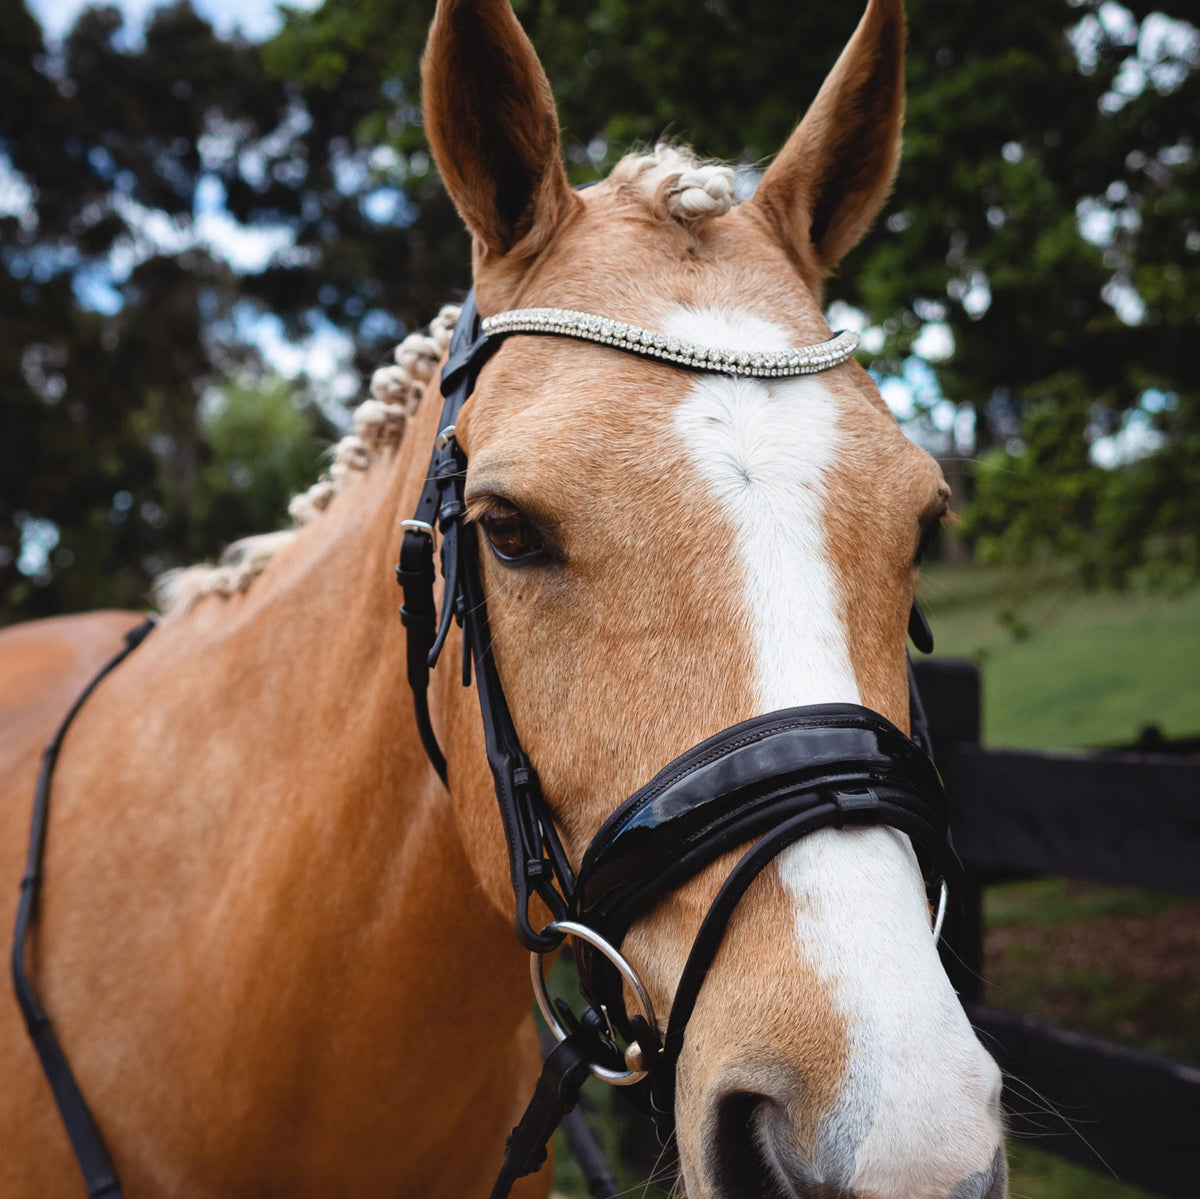 Palomino horse with a black bridle and jewels on the browband.